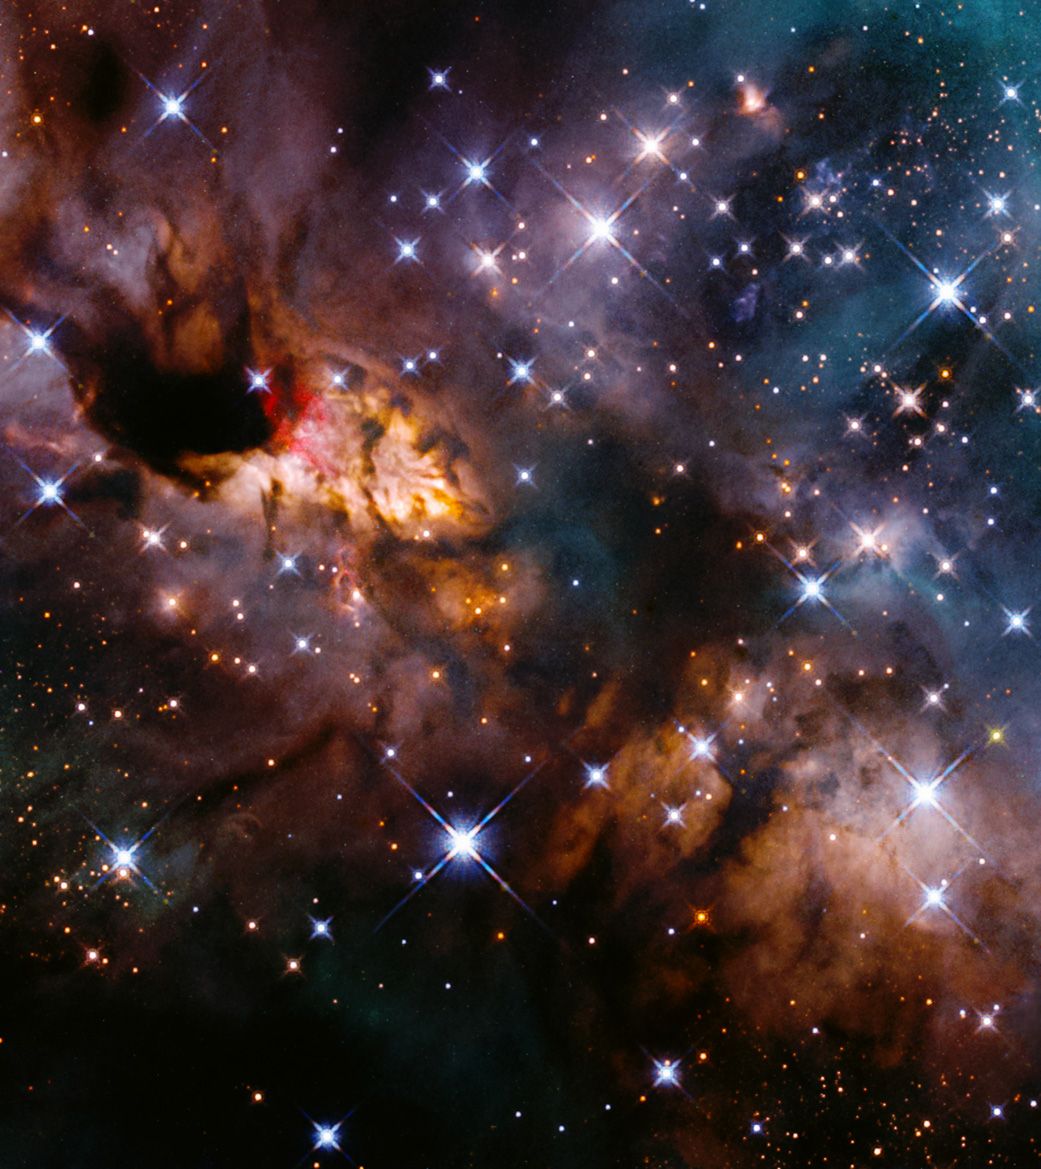 Hubble telescope captures stunning image of the star-forming Prawn Nebula - Space.com